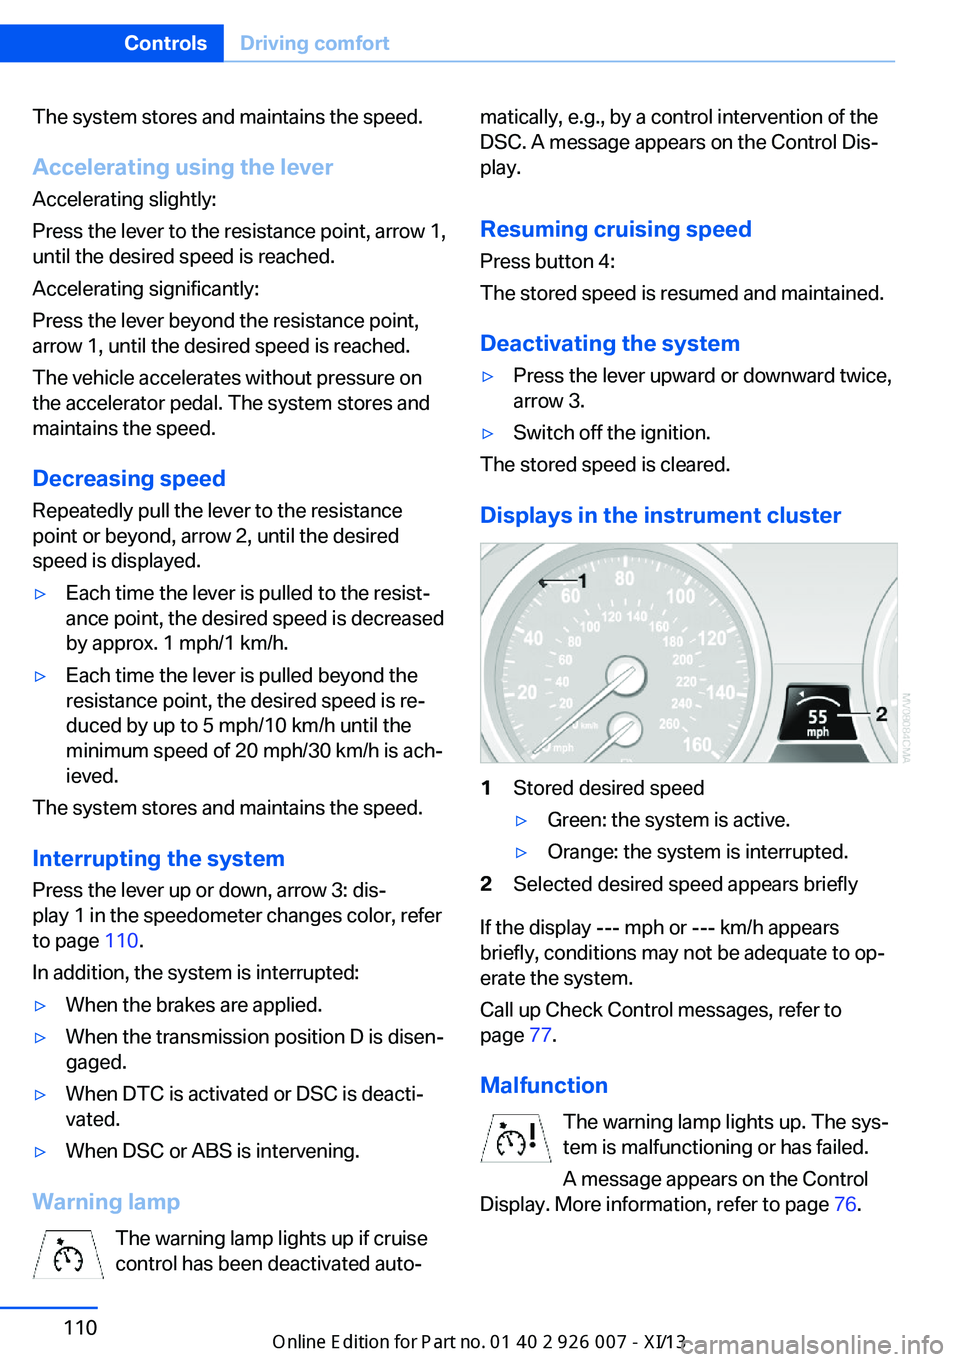 BMW X6 2013 E71 Owners Manual The system stores and maintains the speed.
Accelerating using the lever Accelerating slightly:
Press the lever to the resistance point, arrow 1,
until the desired speed is reached.
Accelerating signif